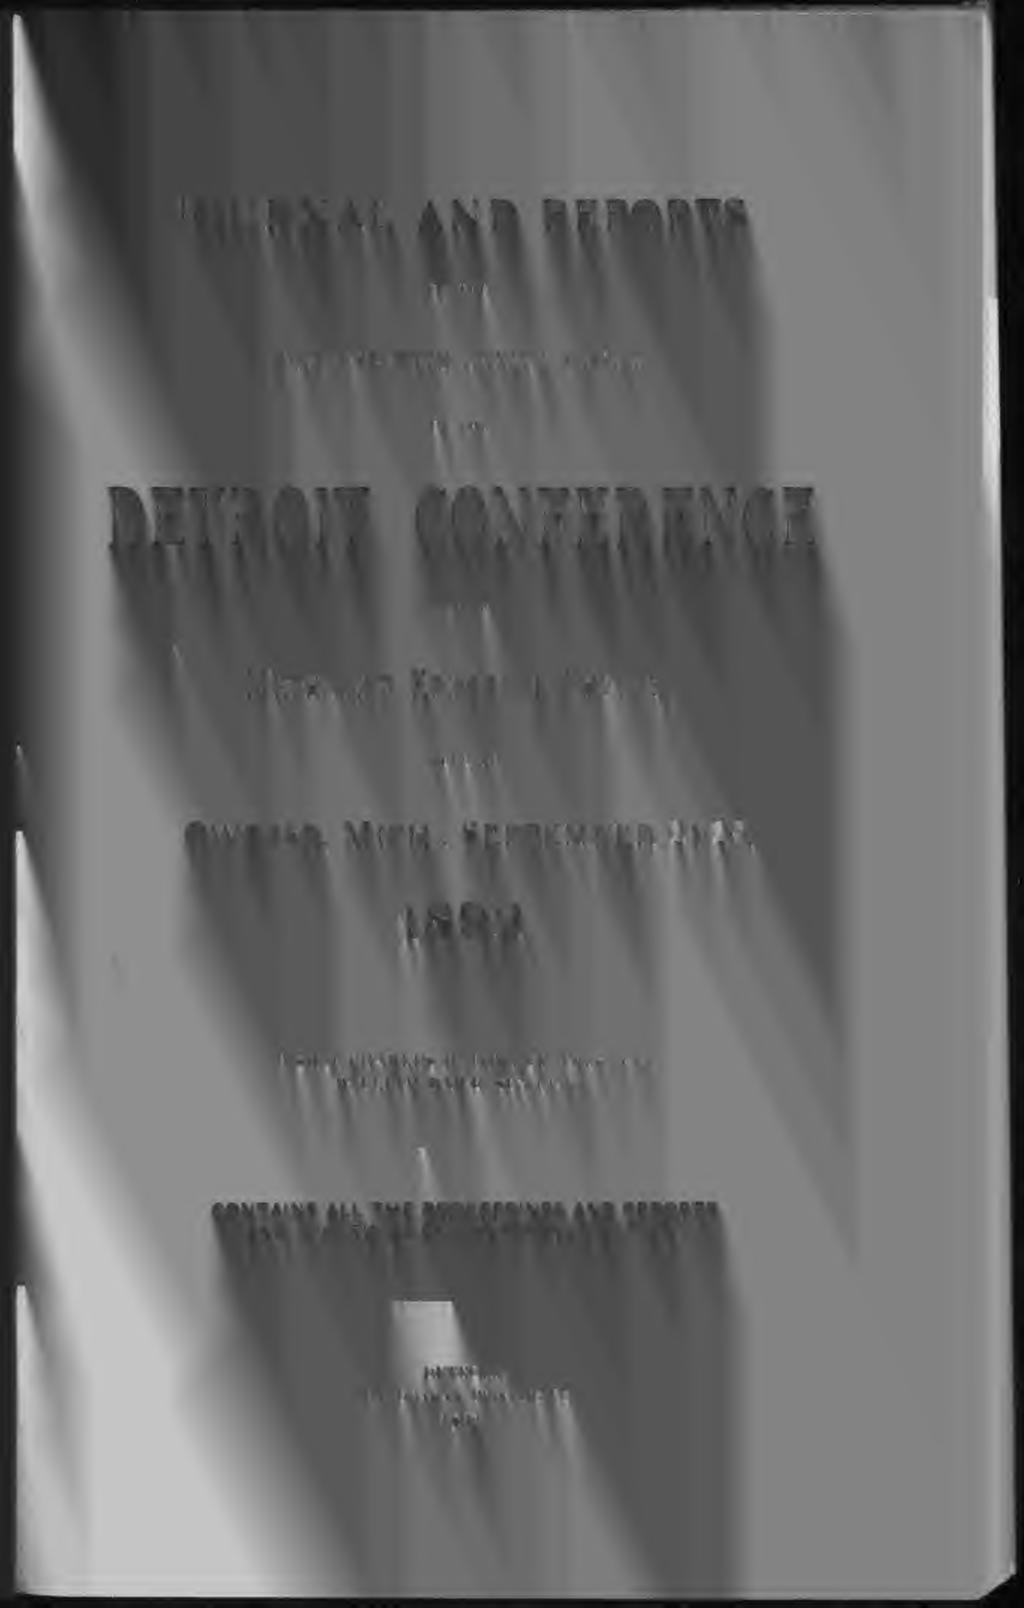 ! JOURNAL AND REPORTS THRTY-SEVENTH ANNUAL SESSON DETROT CONFERENC H Methodst Epscopal Church, Owosso, Mch., September 2-26, 892, BSHOP CHARLES H.